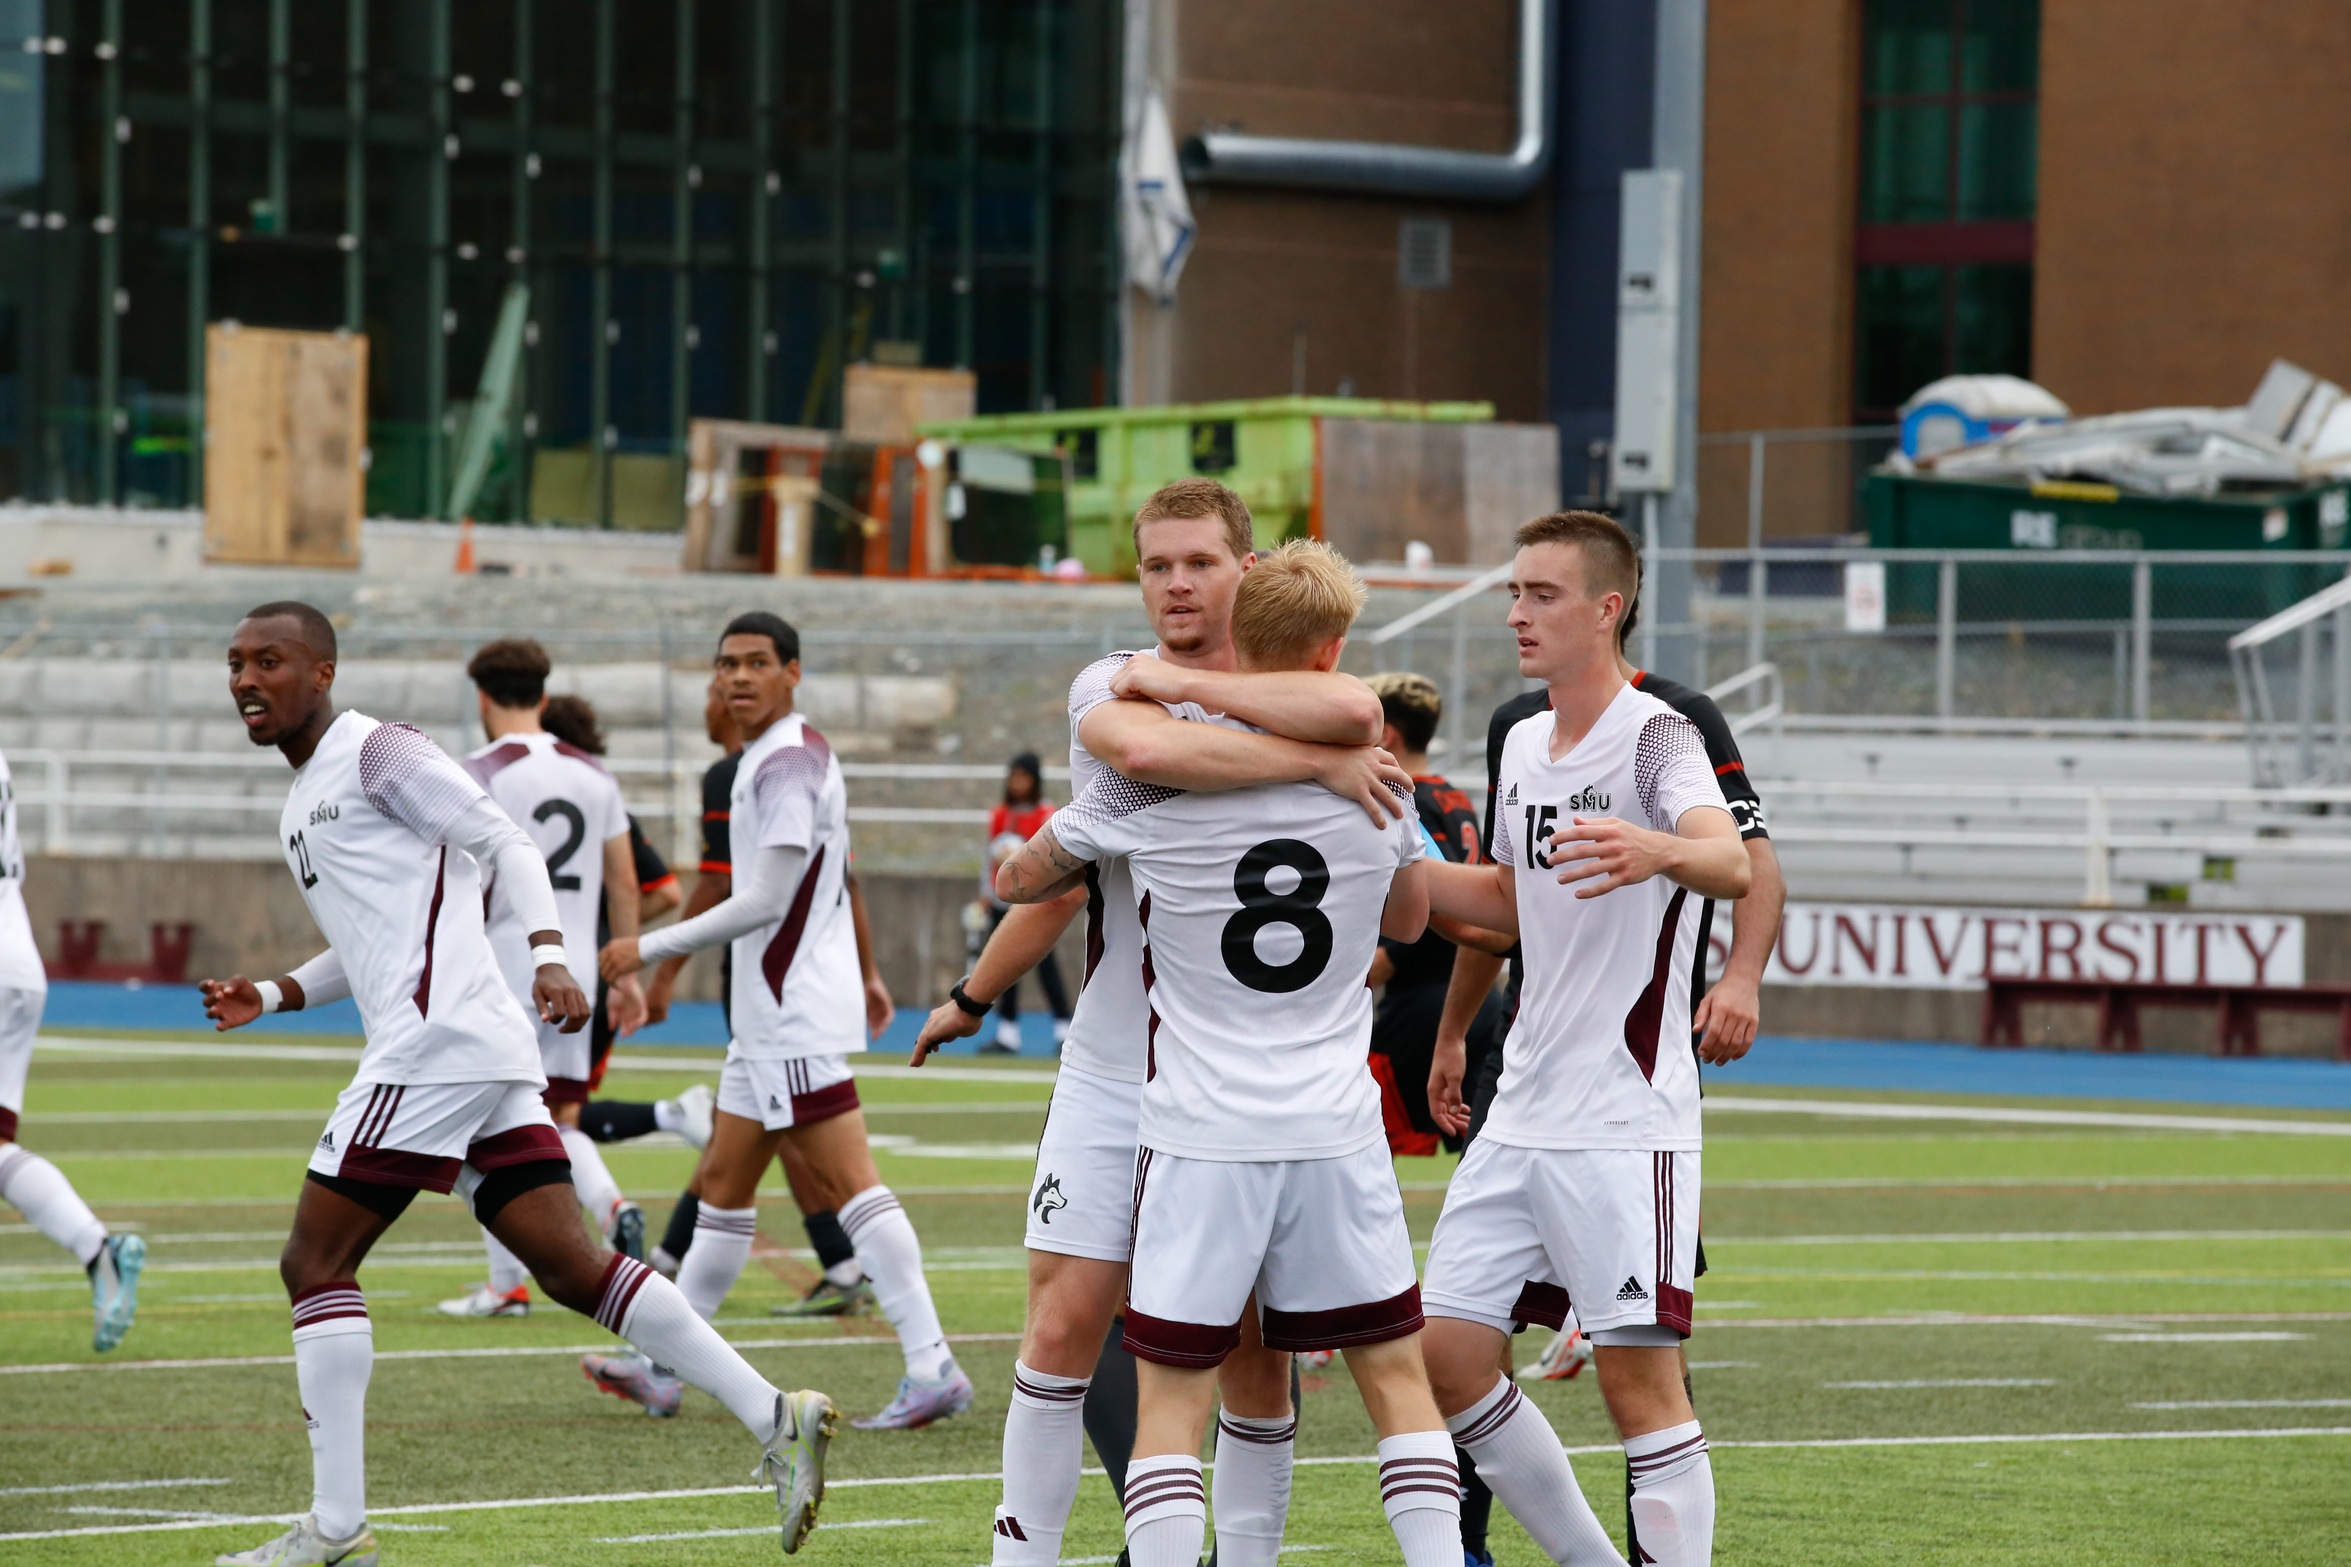 Kloppenburg stoppage time goal earns Huskies 1-1 draw against #3 ranked Capers